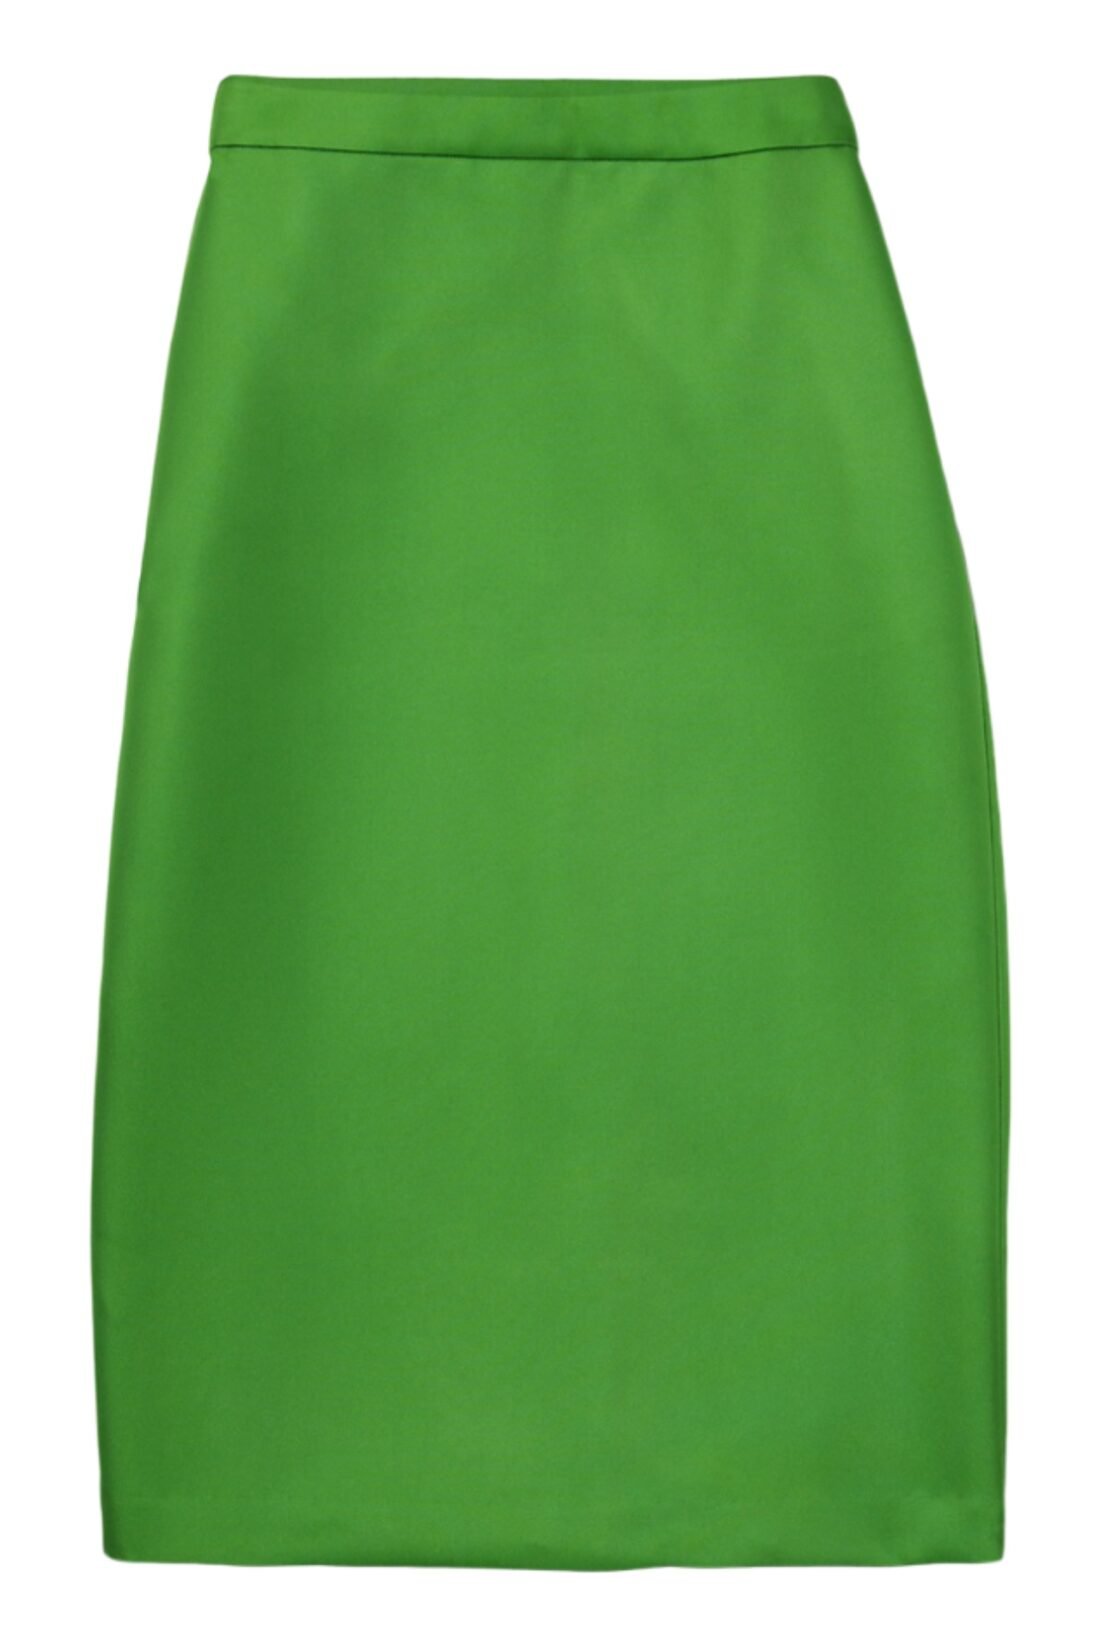 10 Favorite Pieces of Green Clothing